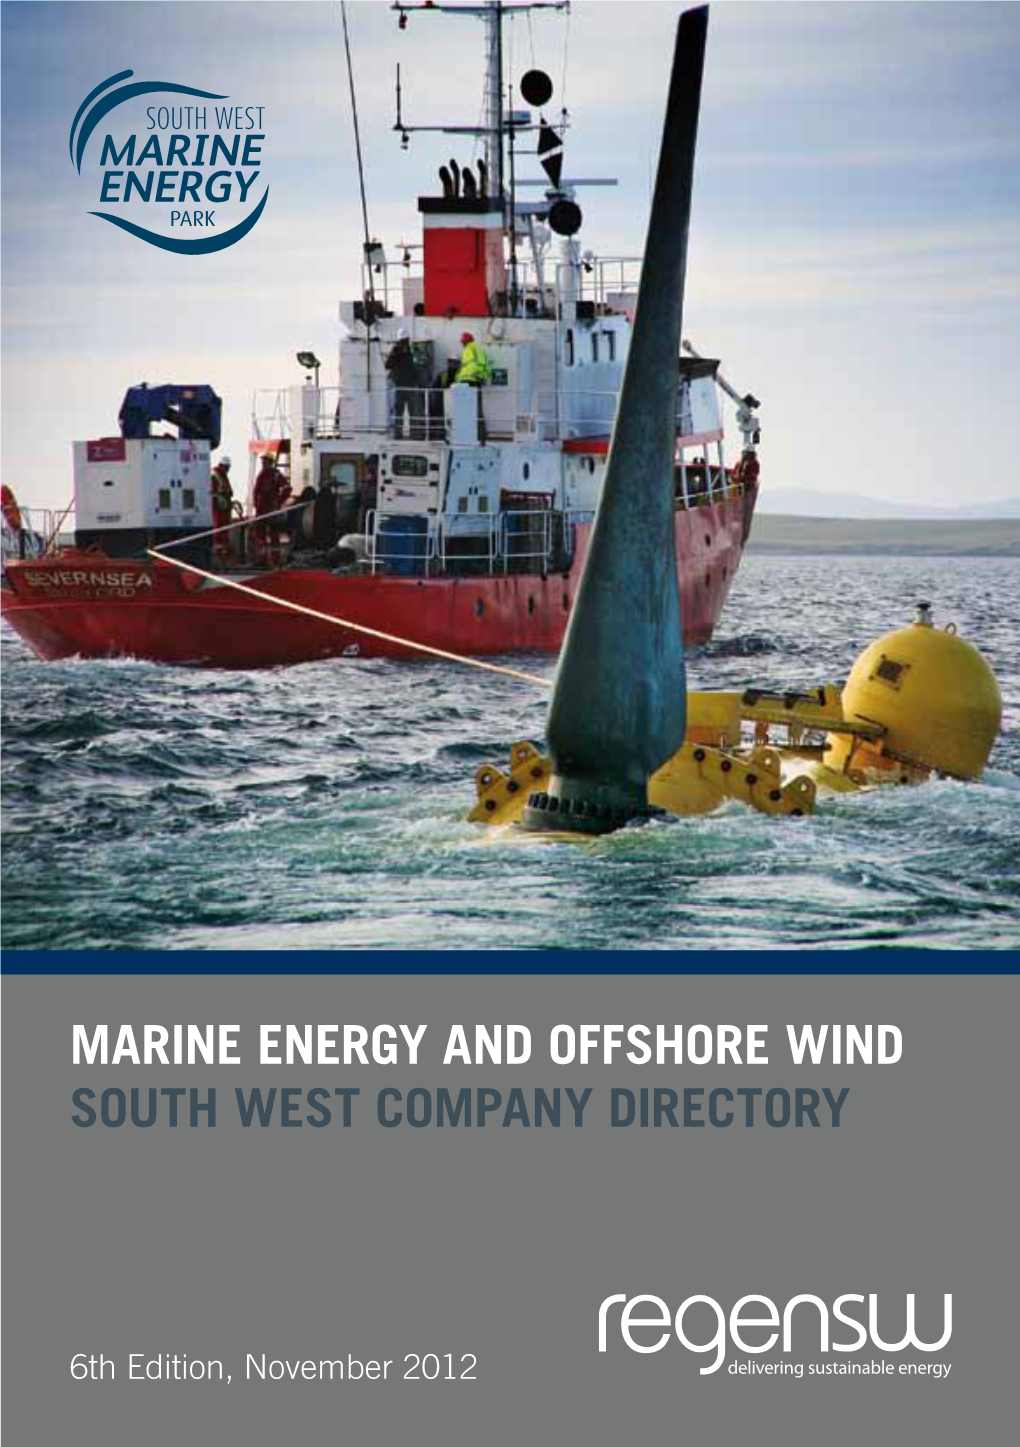 South West Marine Energy Supply Chain Directory